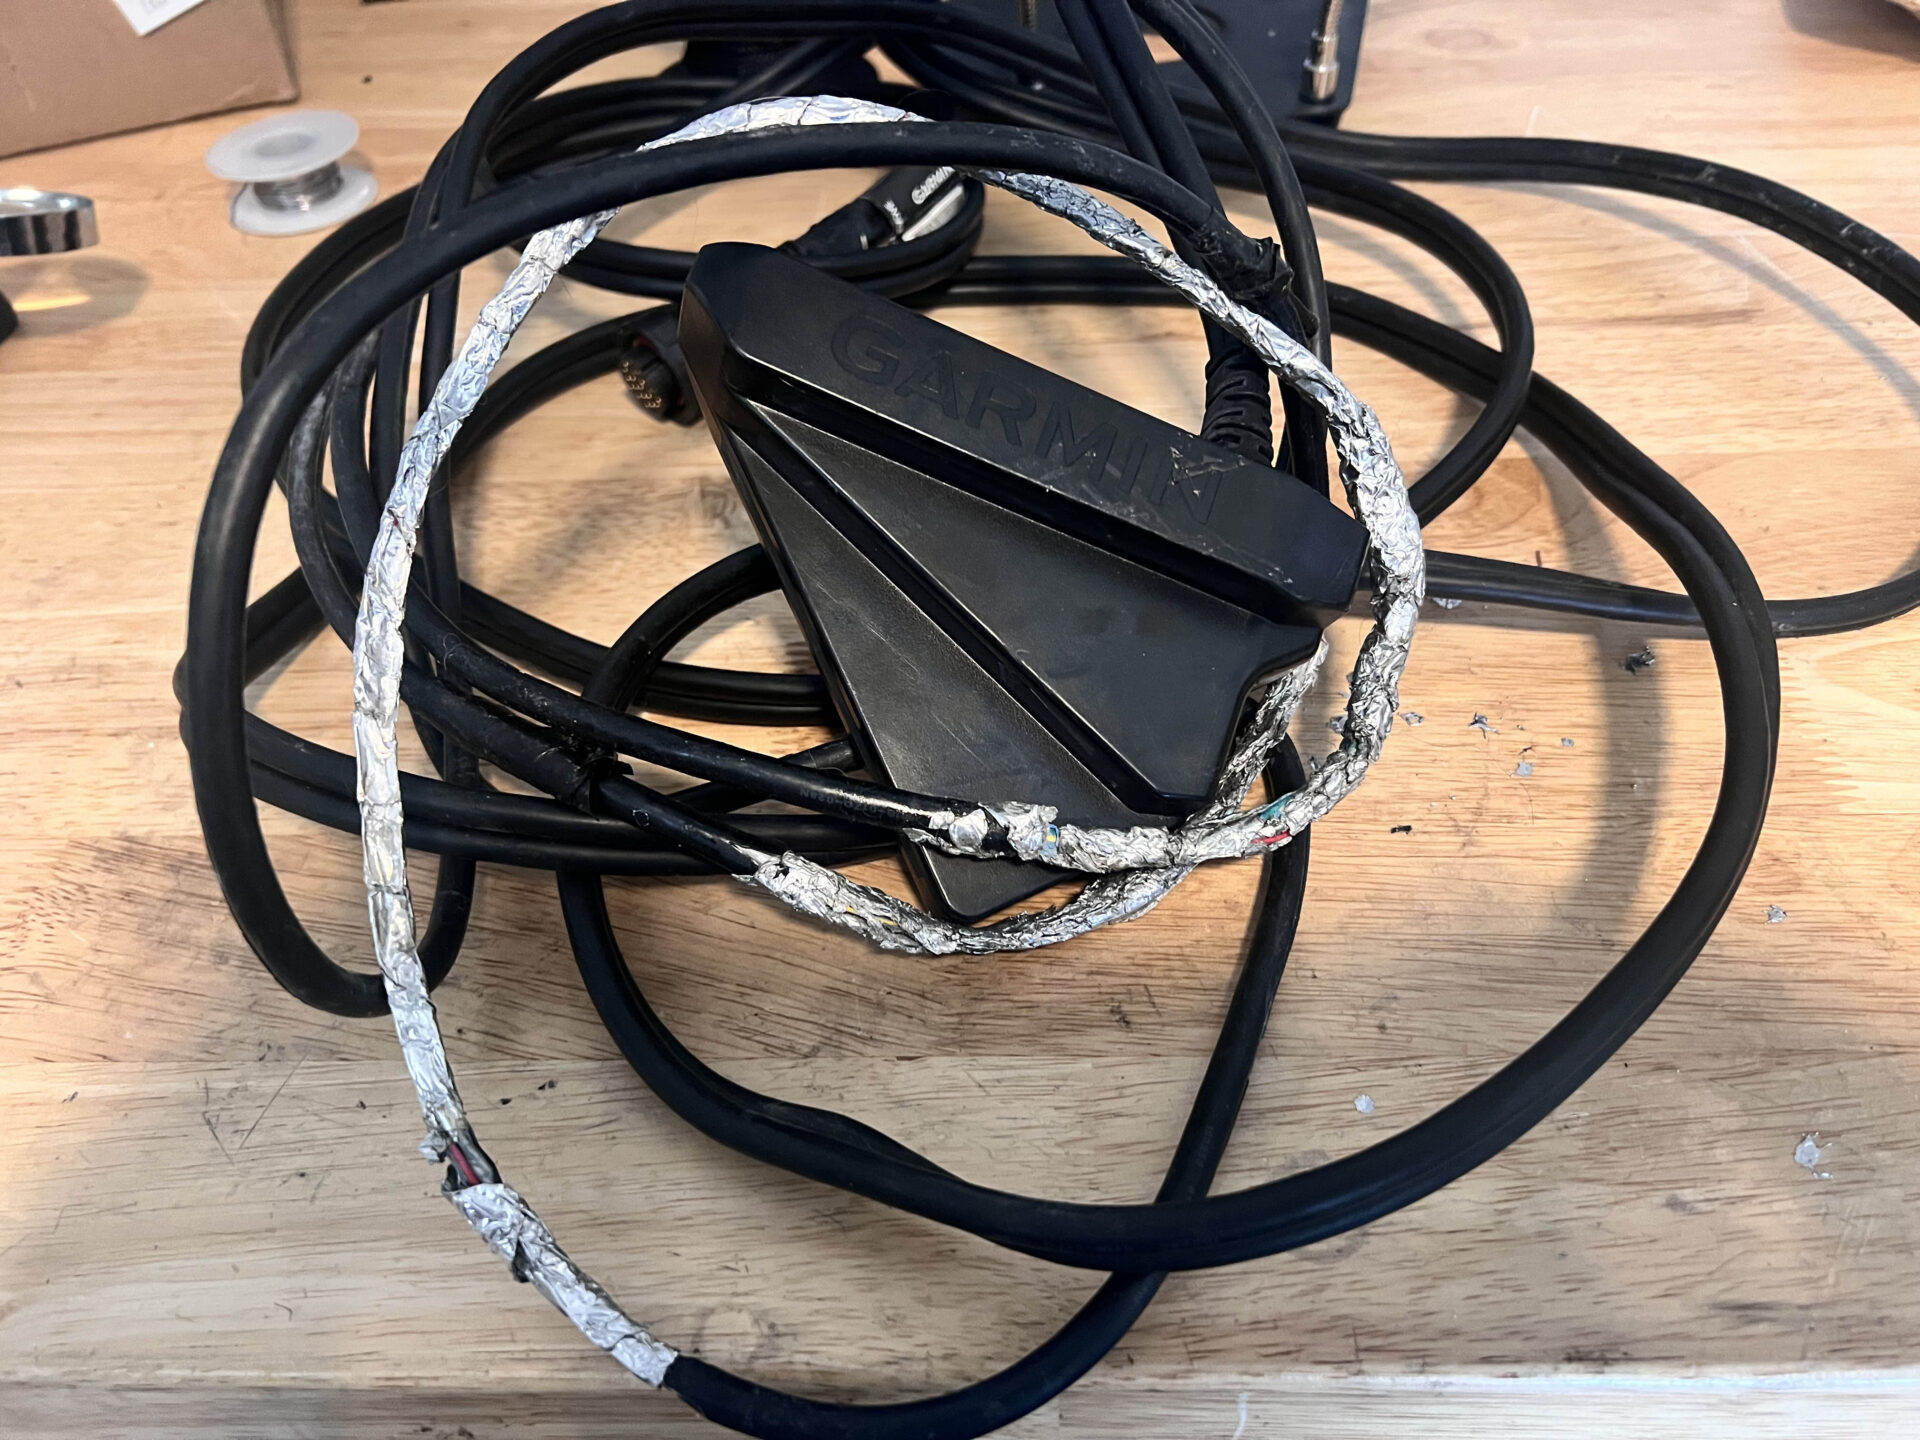 The protective covering is complete stripped from this Garmin transducer cable. (Photo courtesy Joey Cook)